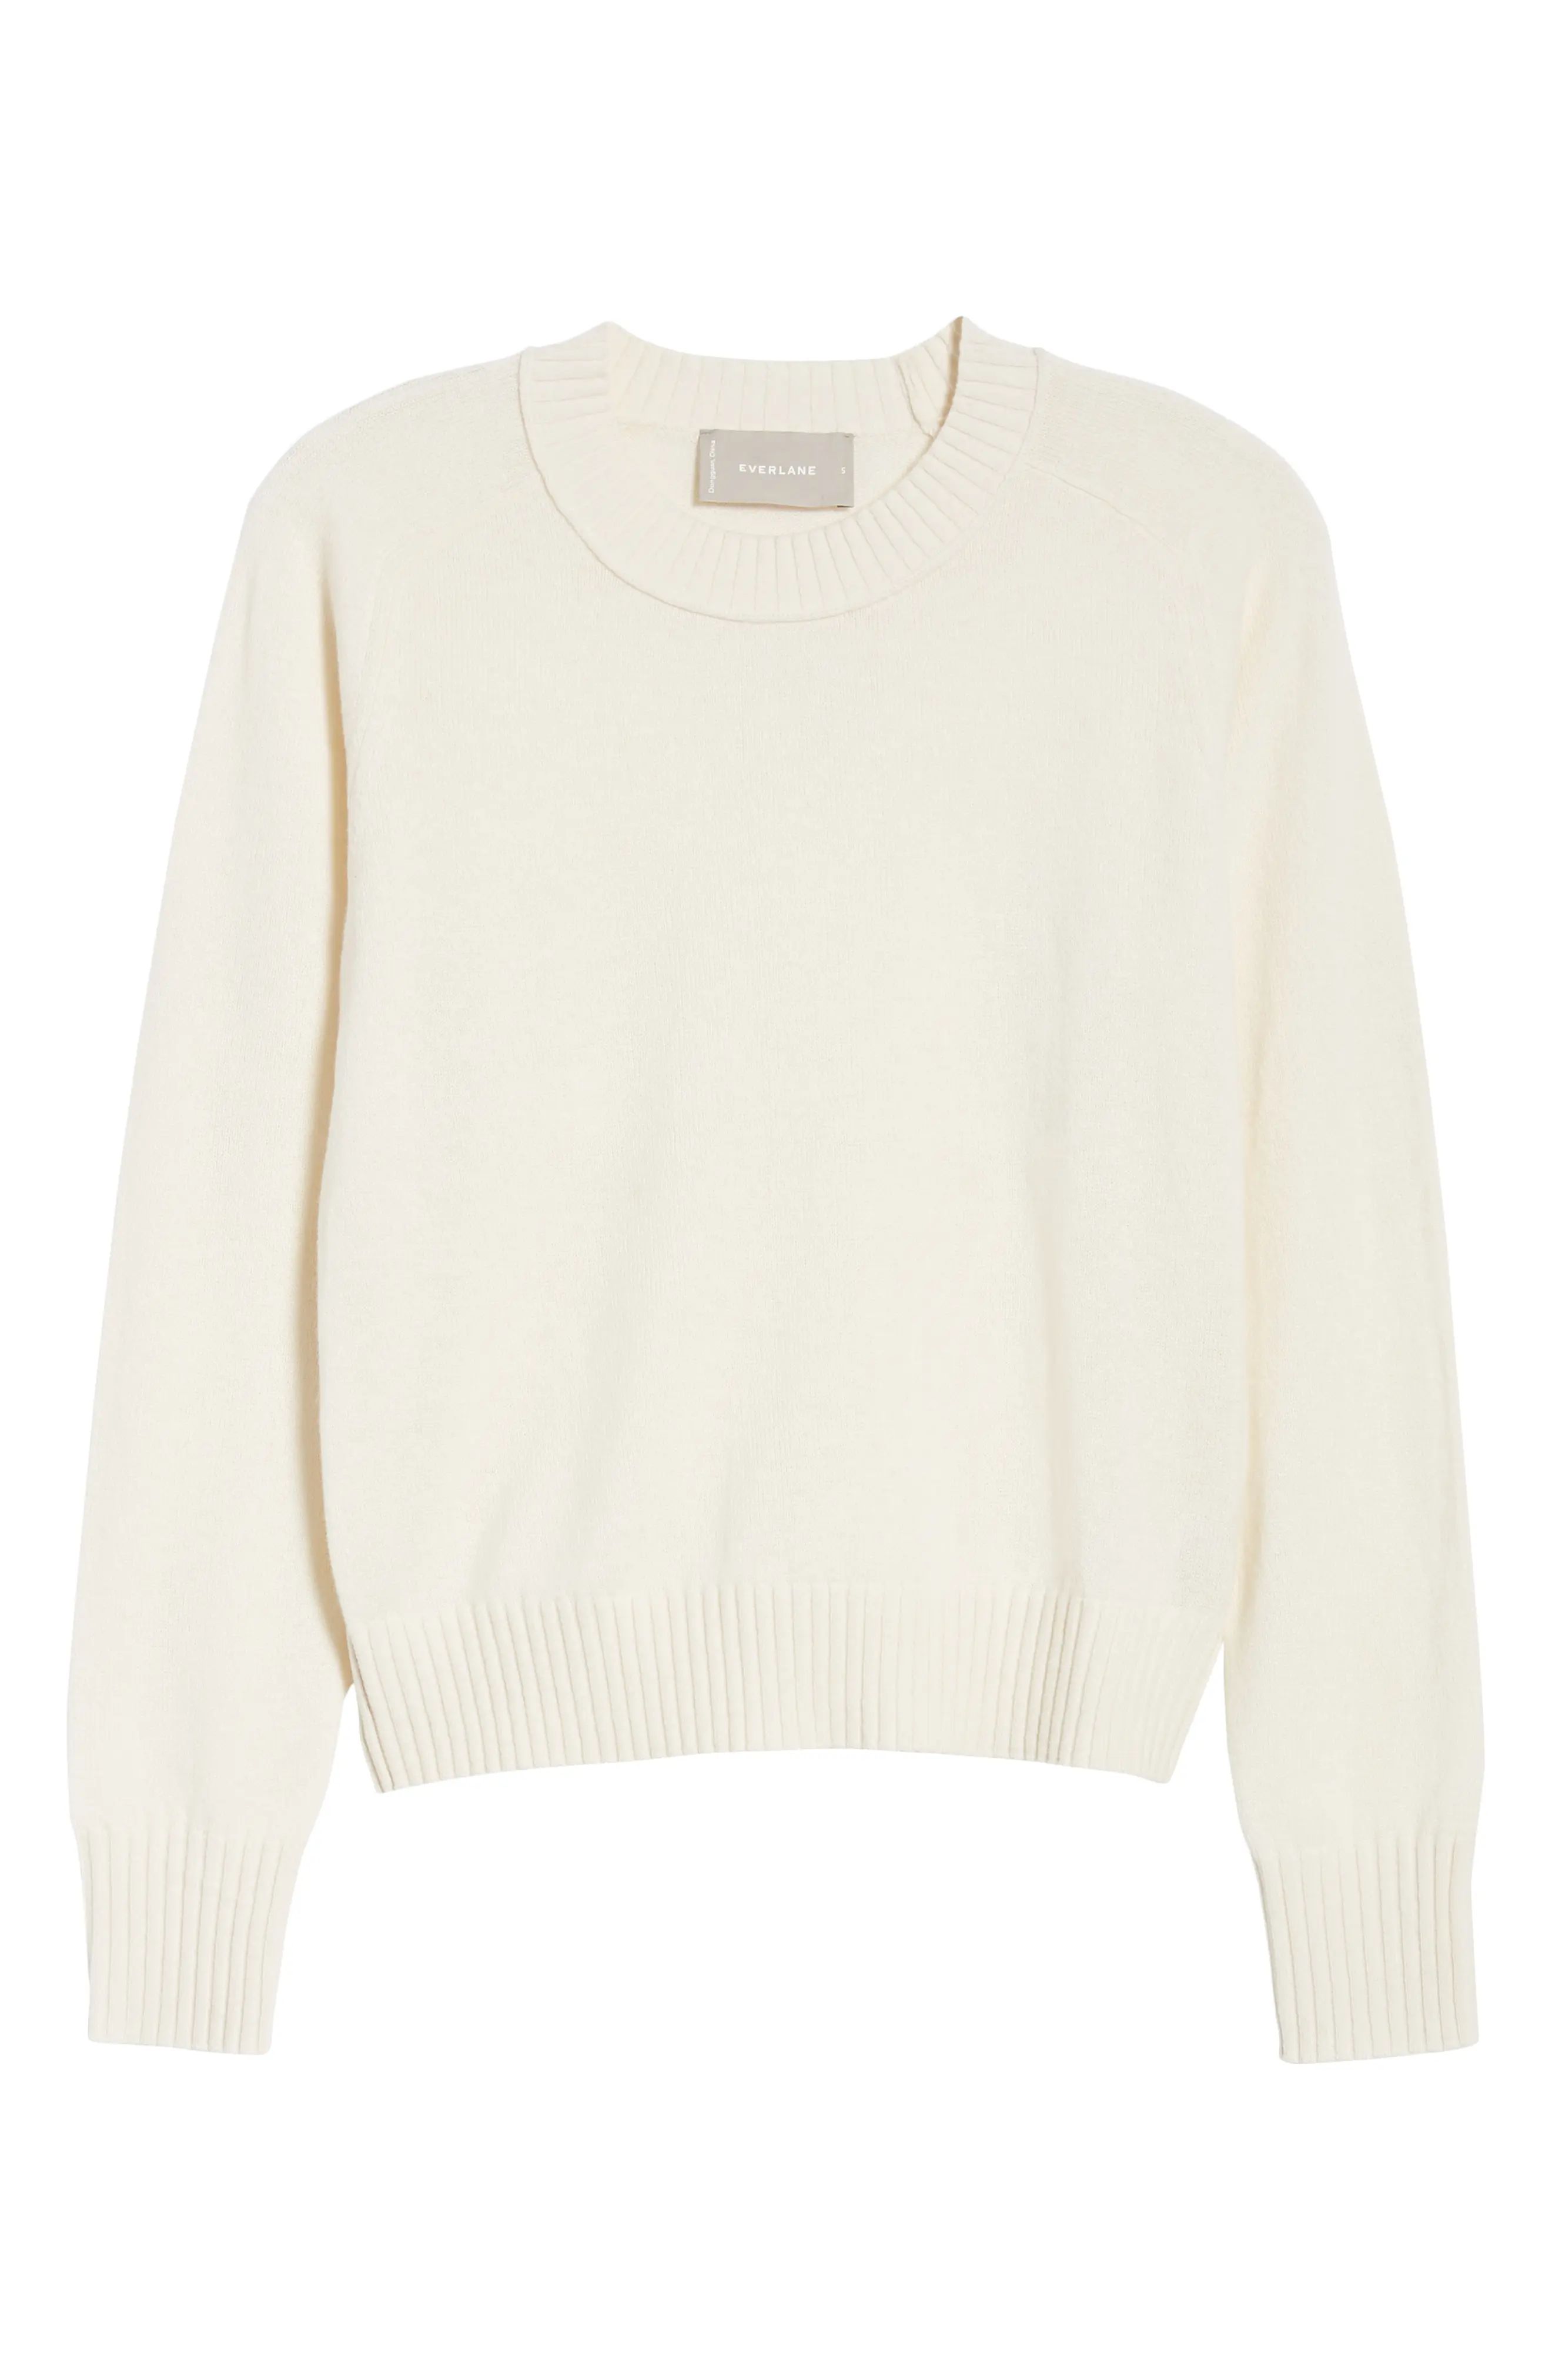 Women's Everlane The Recashmere Vintage Crew Sweater, Size Large - White | Nordstrom